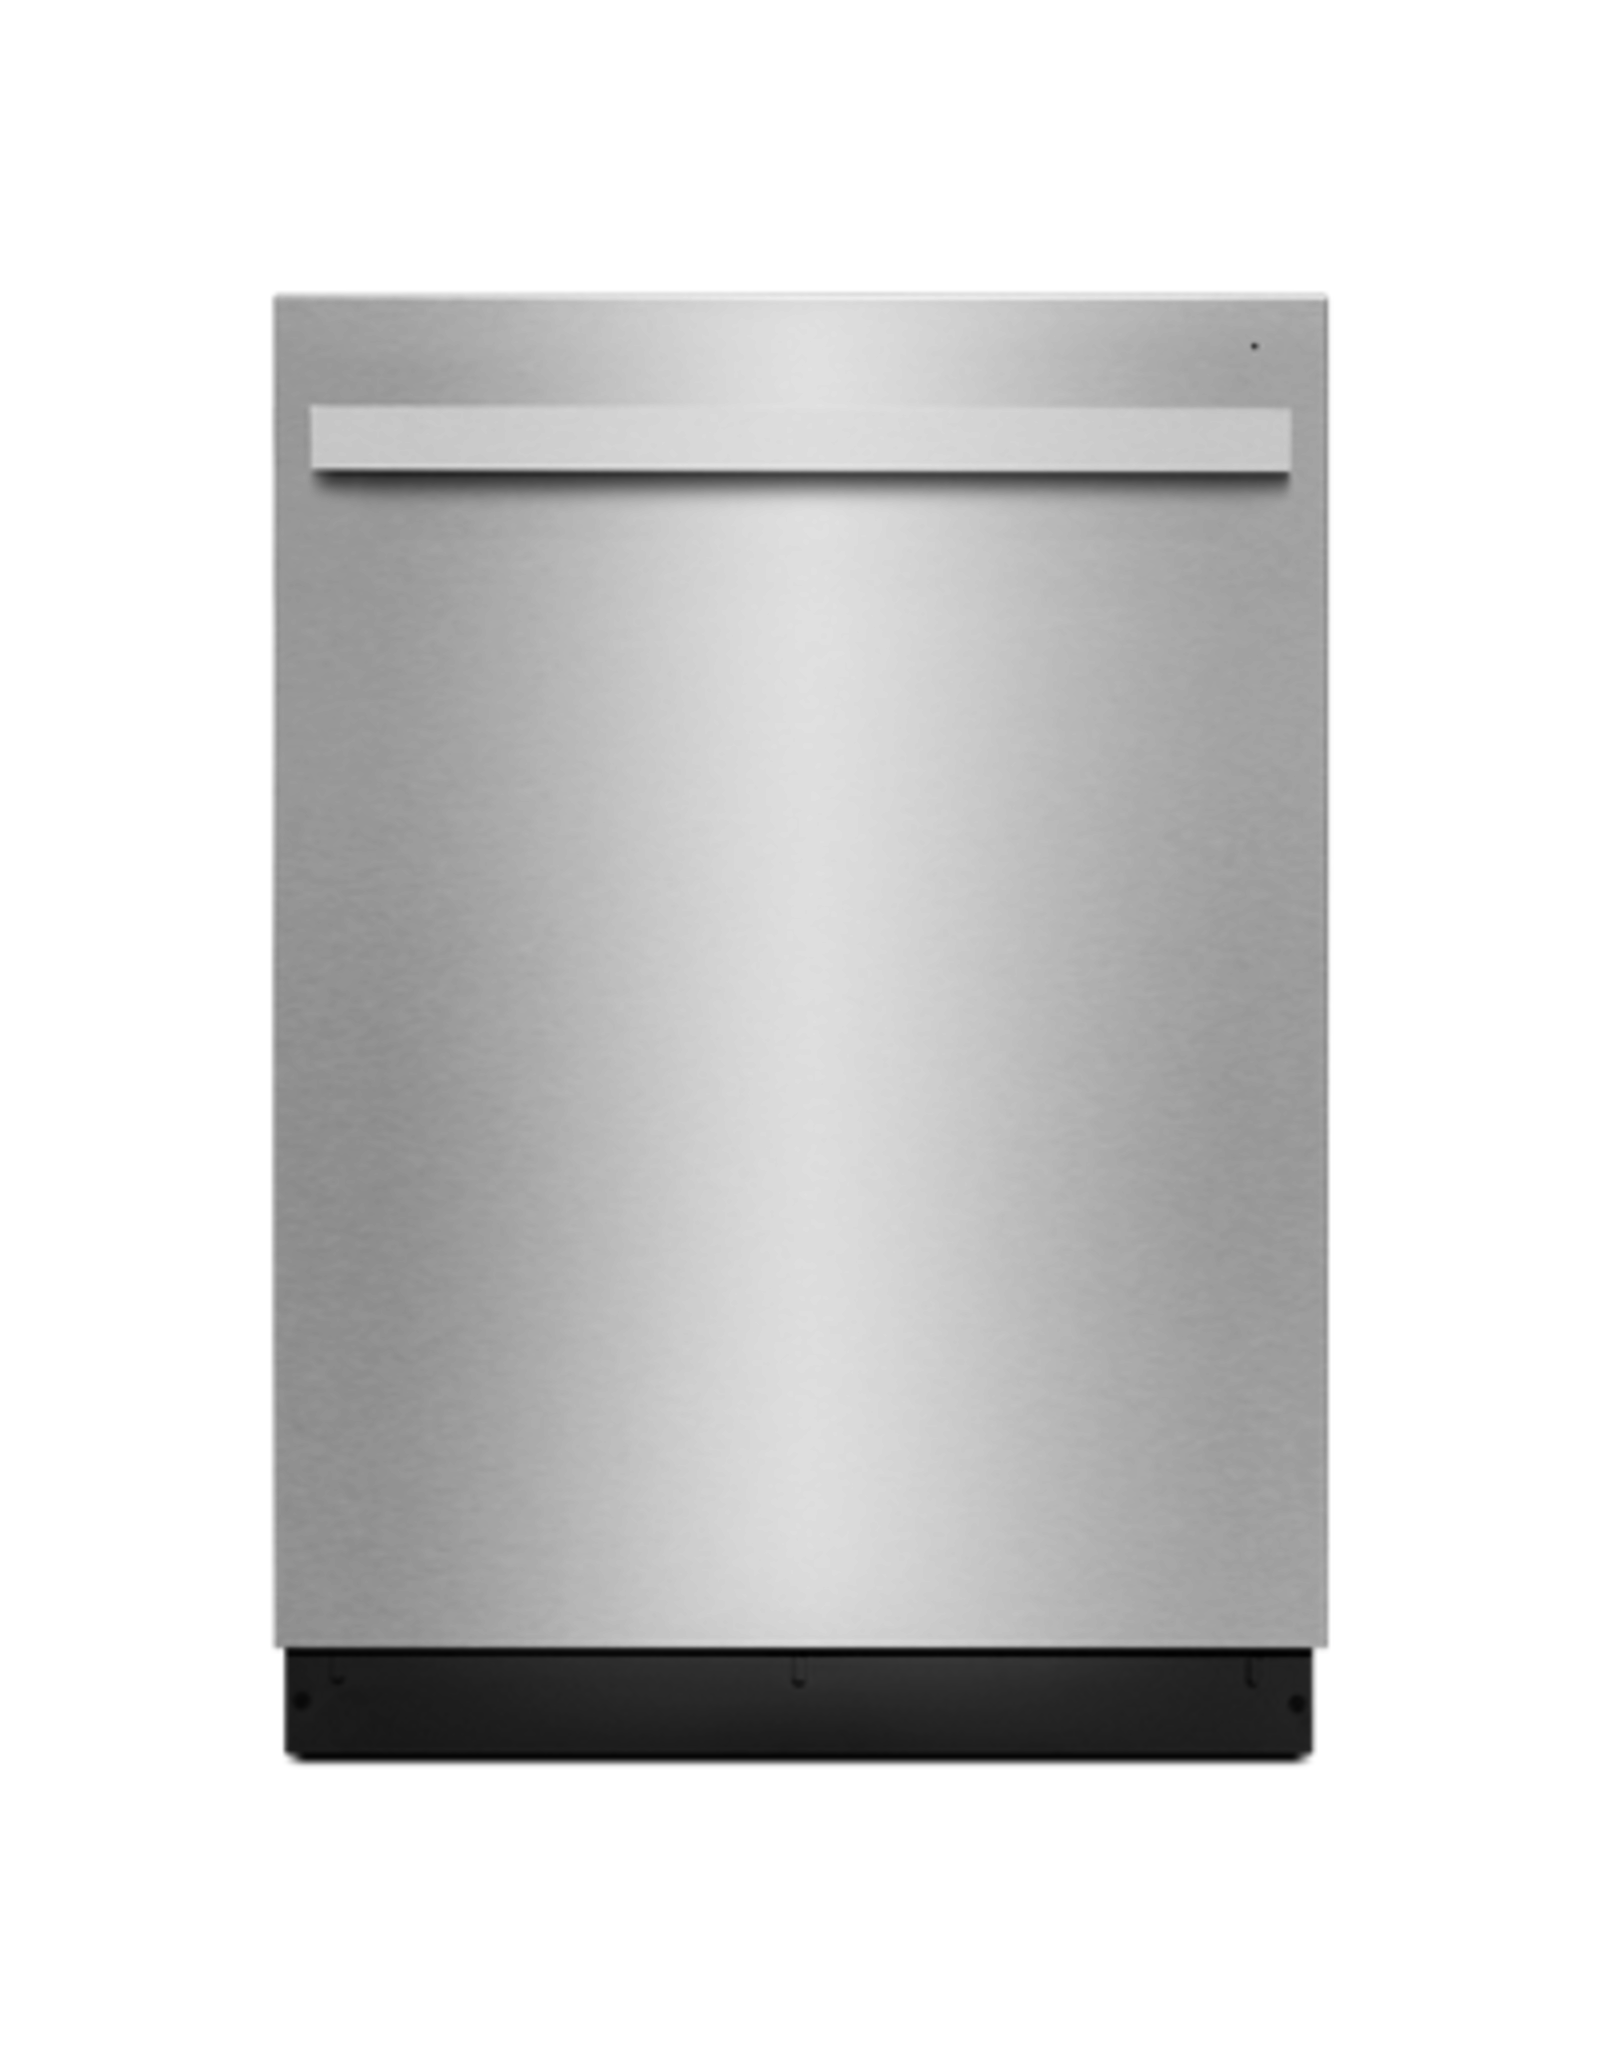 JENN-AIR 24-inch, Built-in Dishwasher with TriFecta™ Wash System (JDTSS244GM)